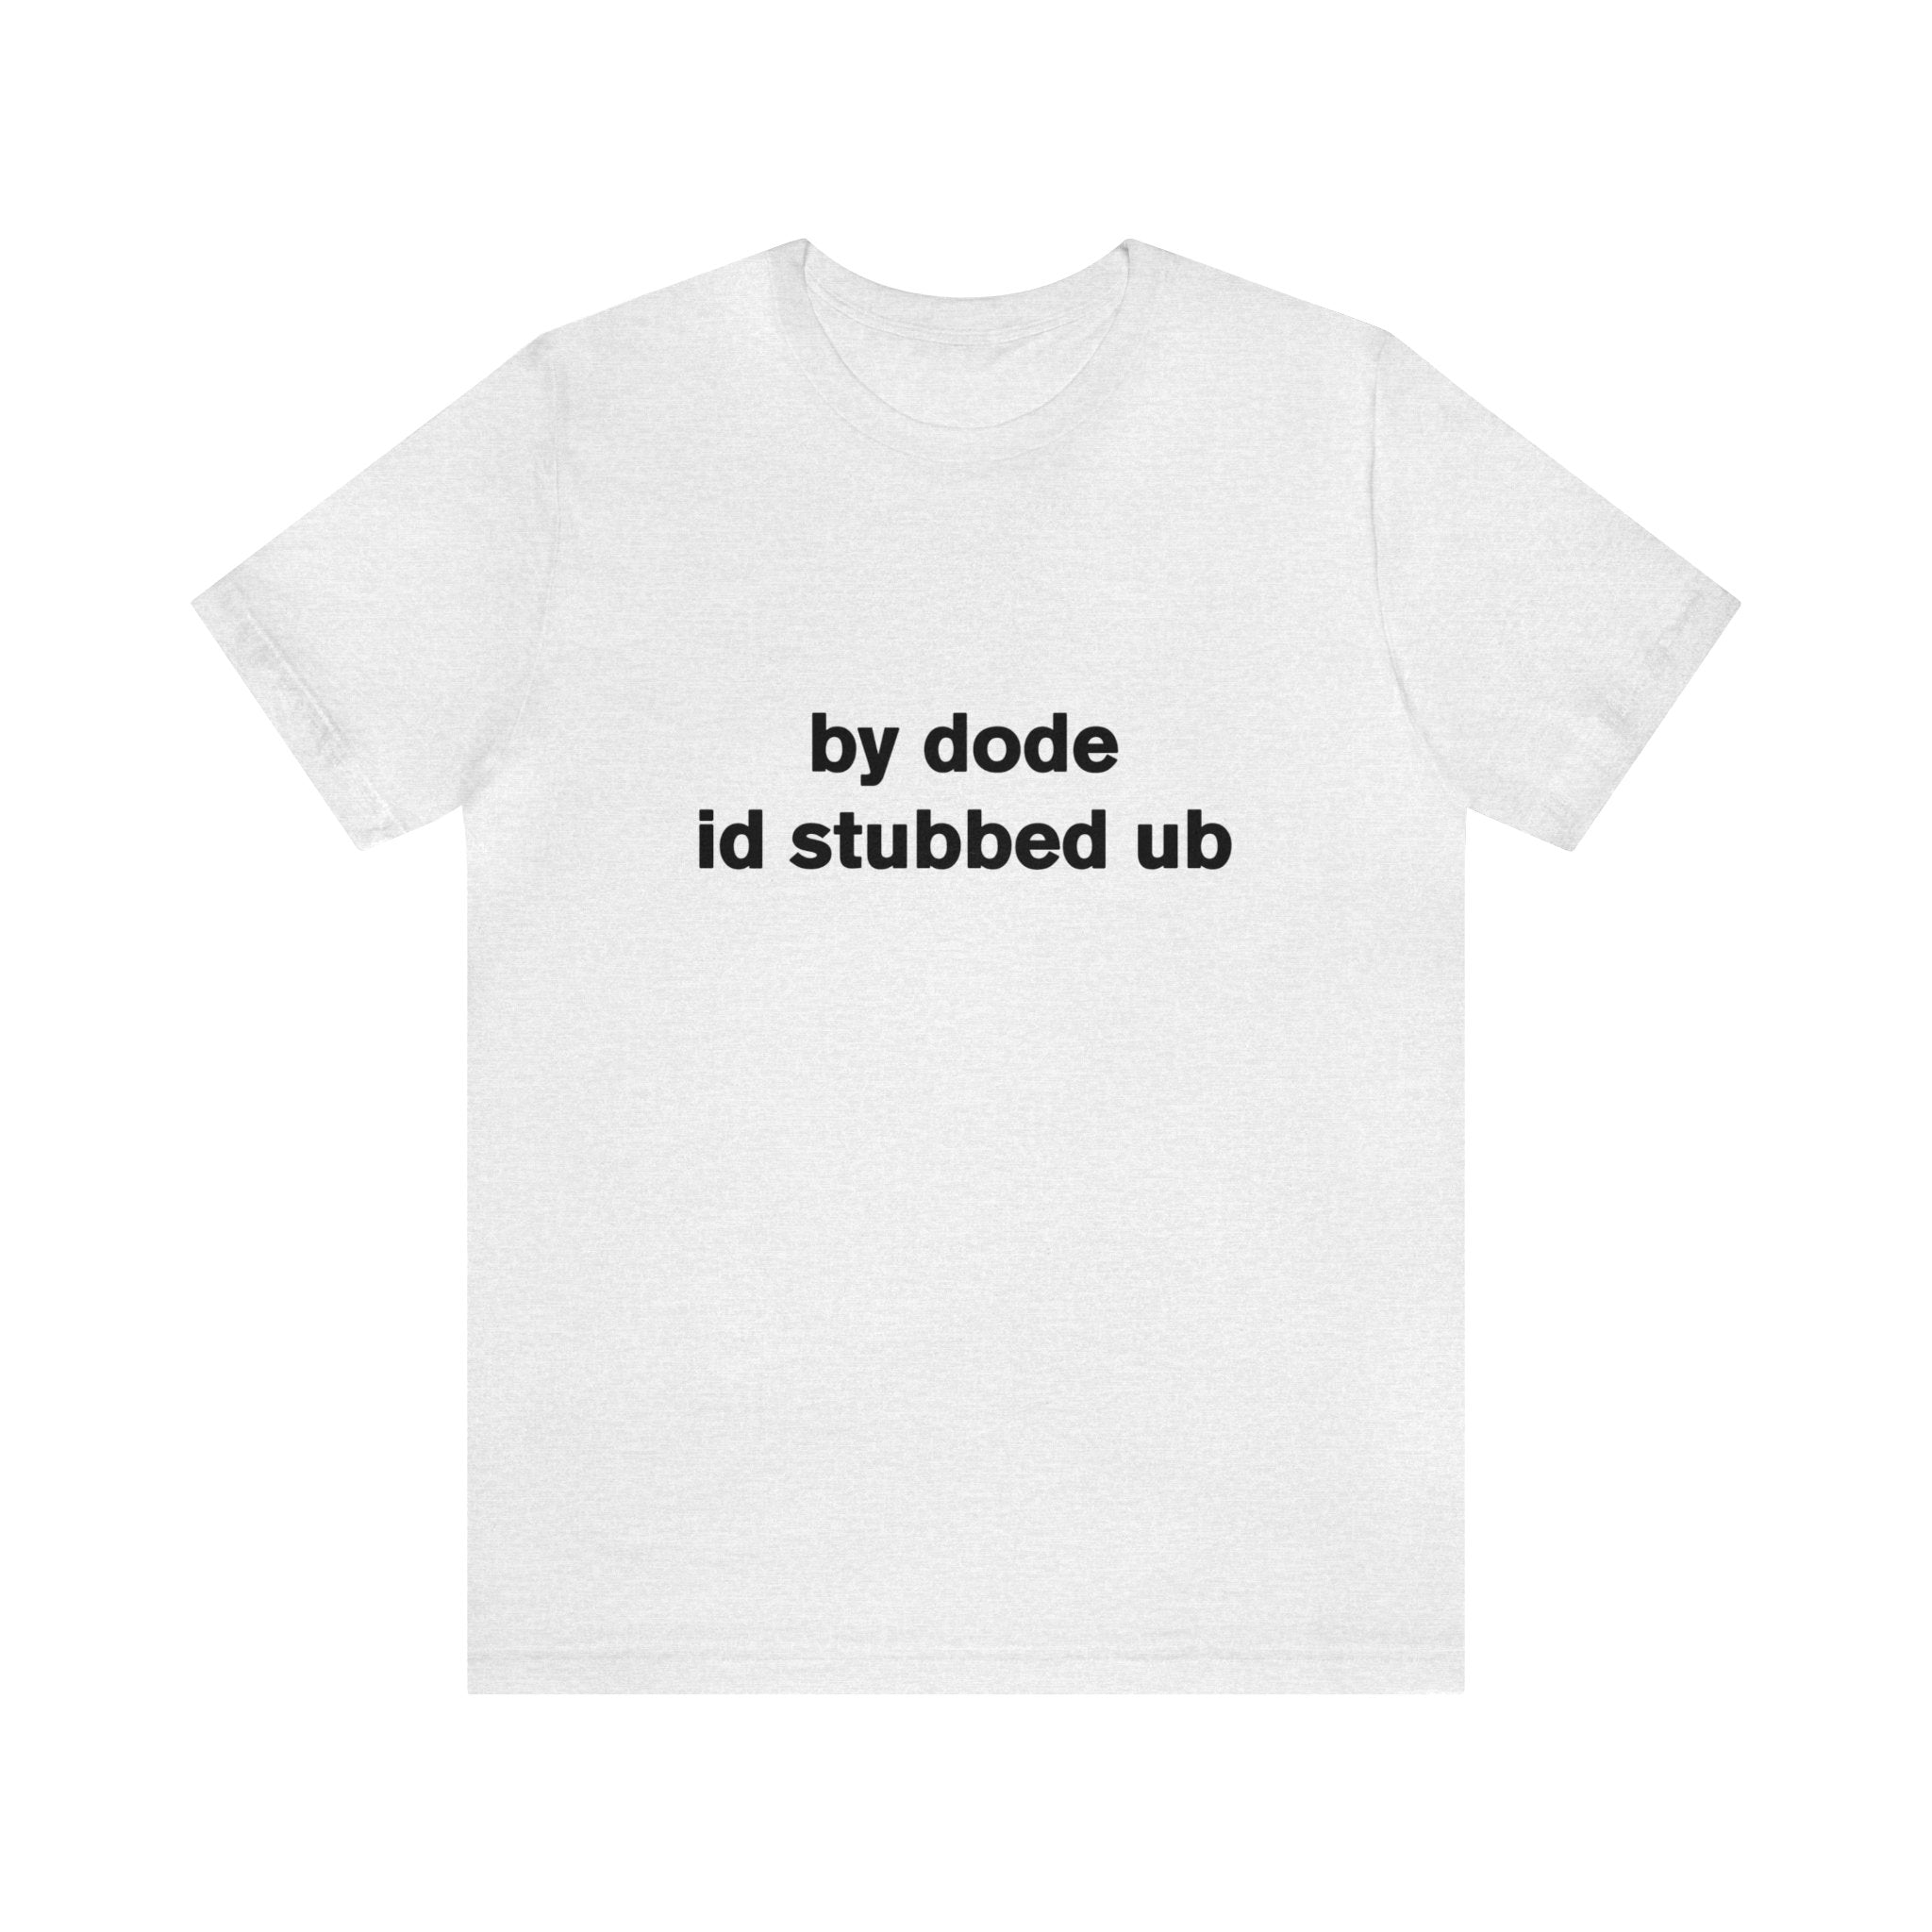 by dode - t-shirt